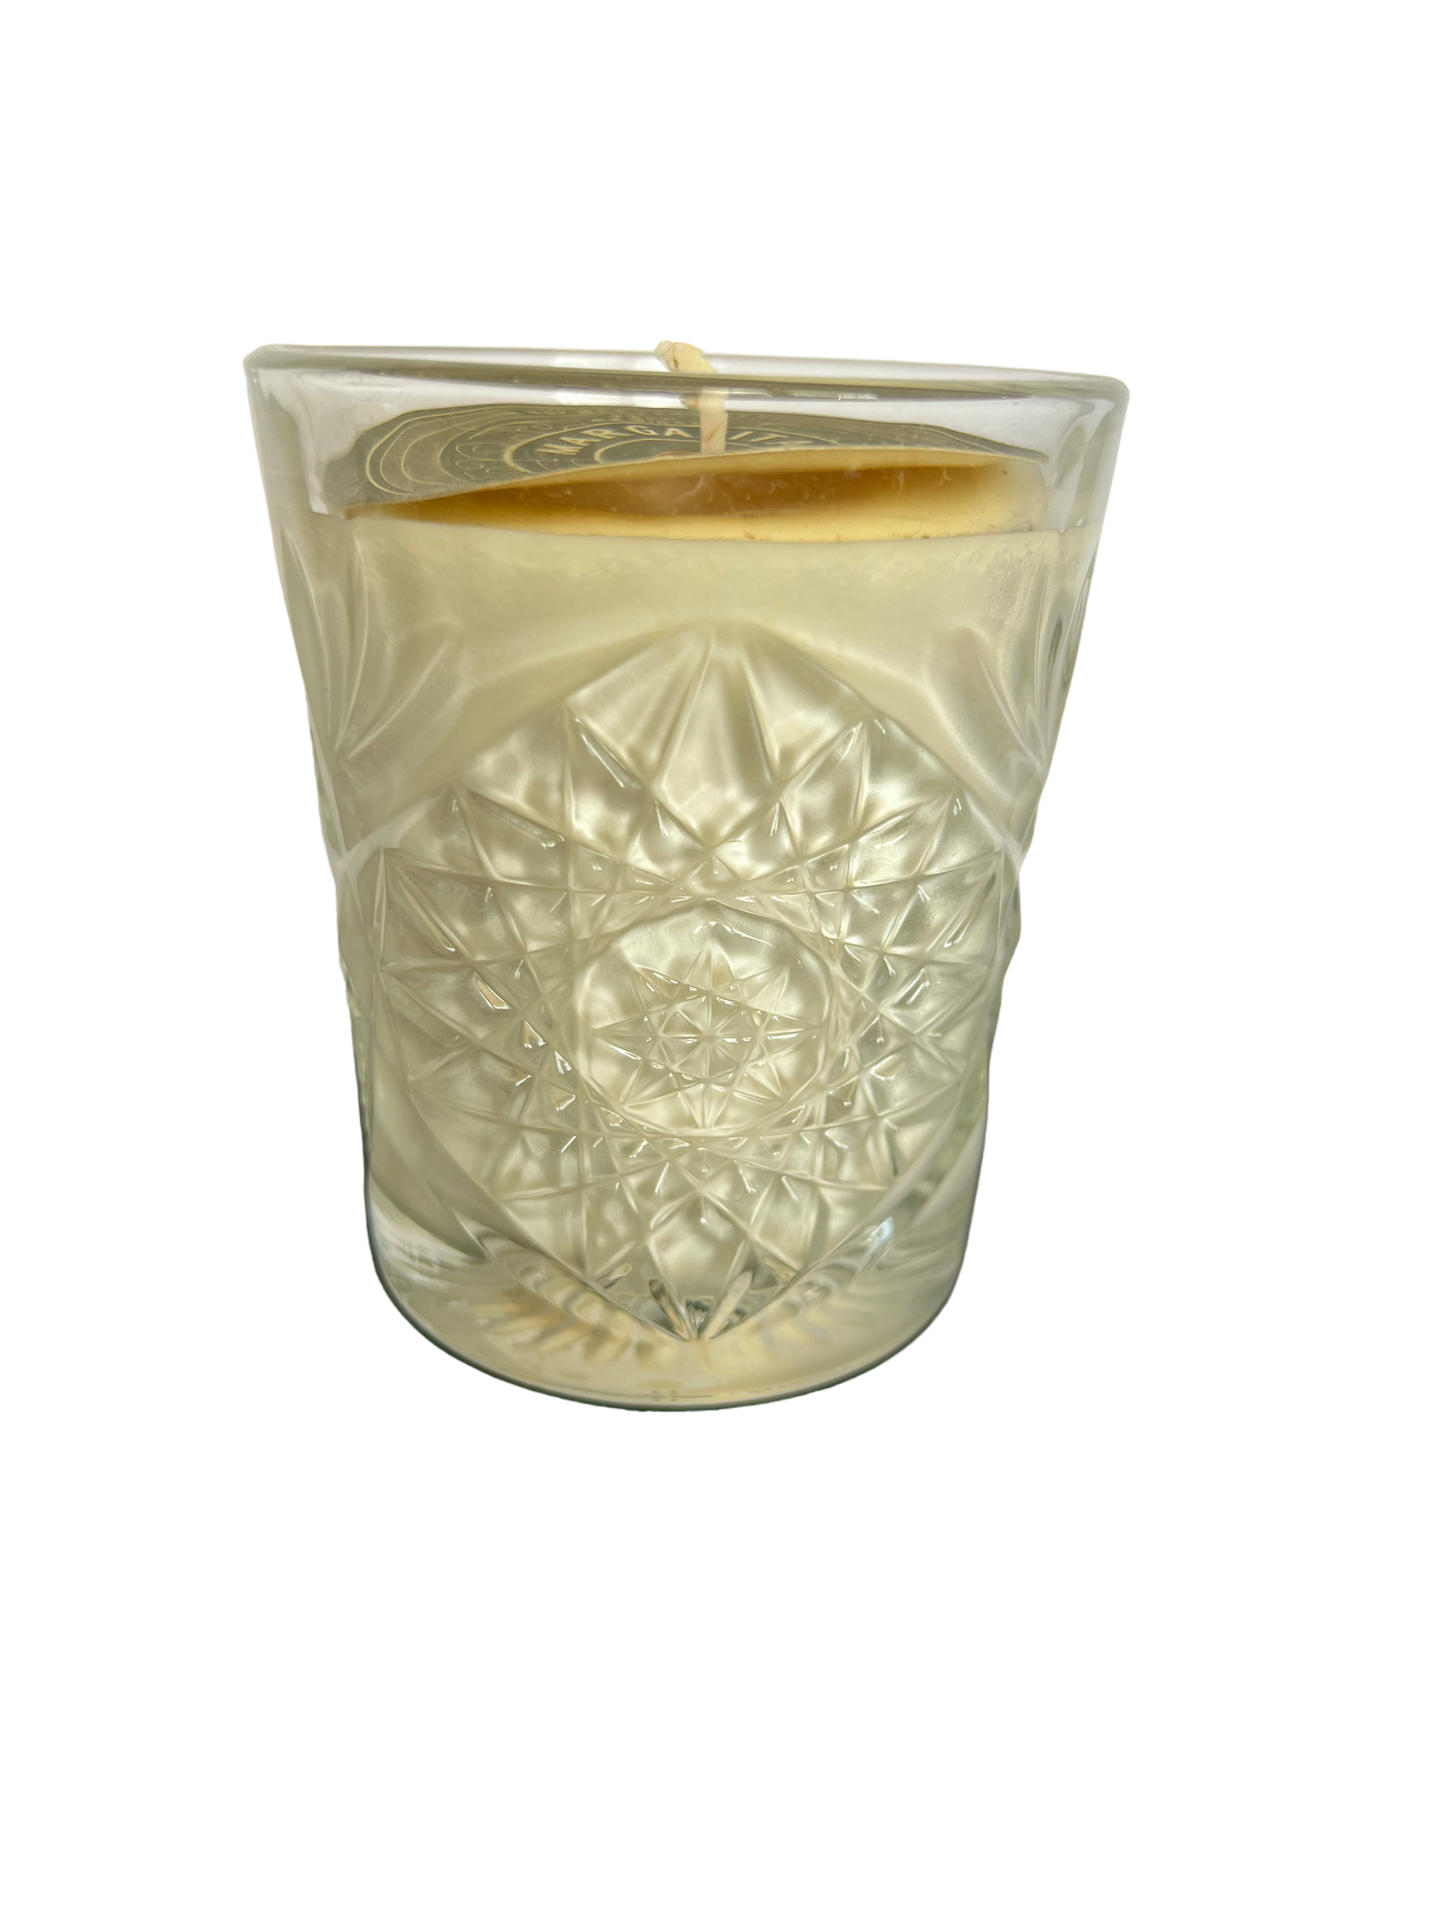 Vintage Inspired Candle - Cosmo or Margarita